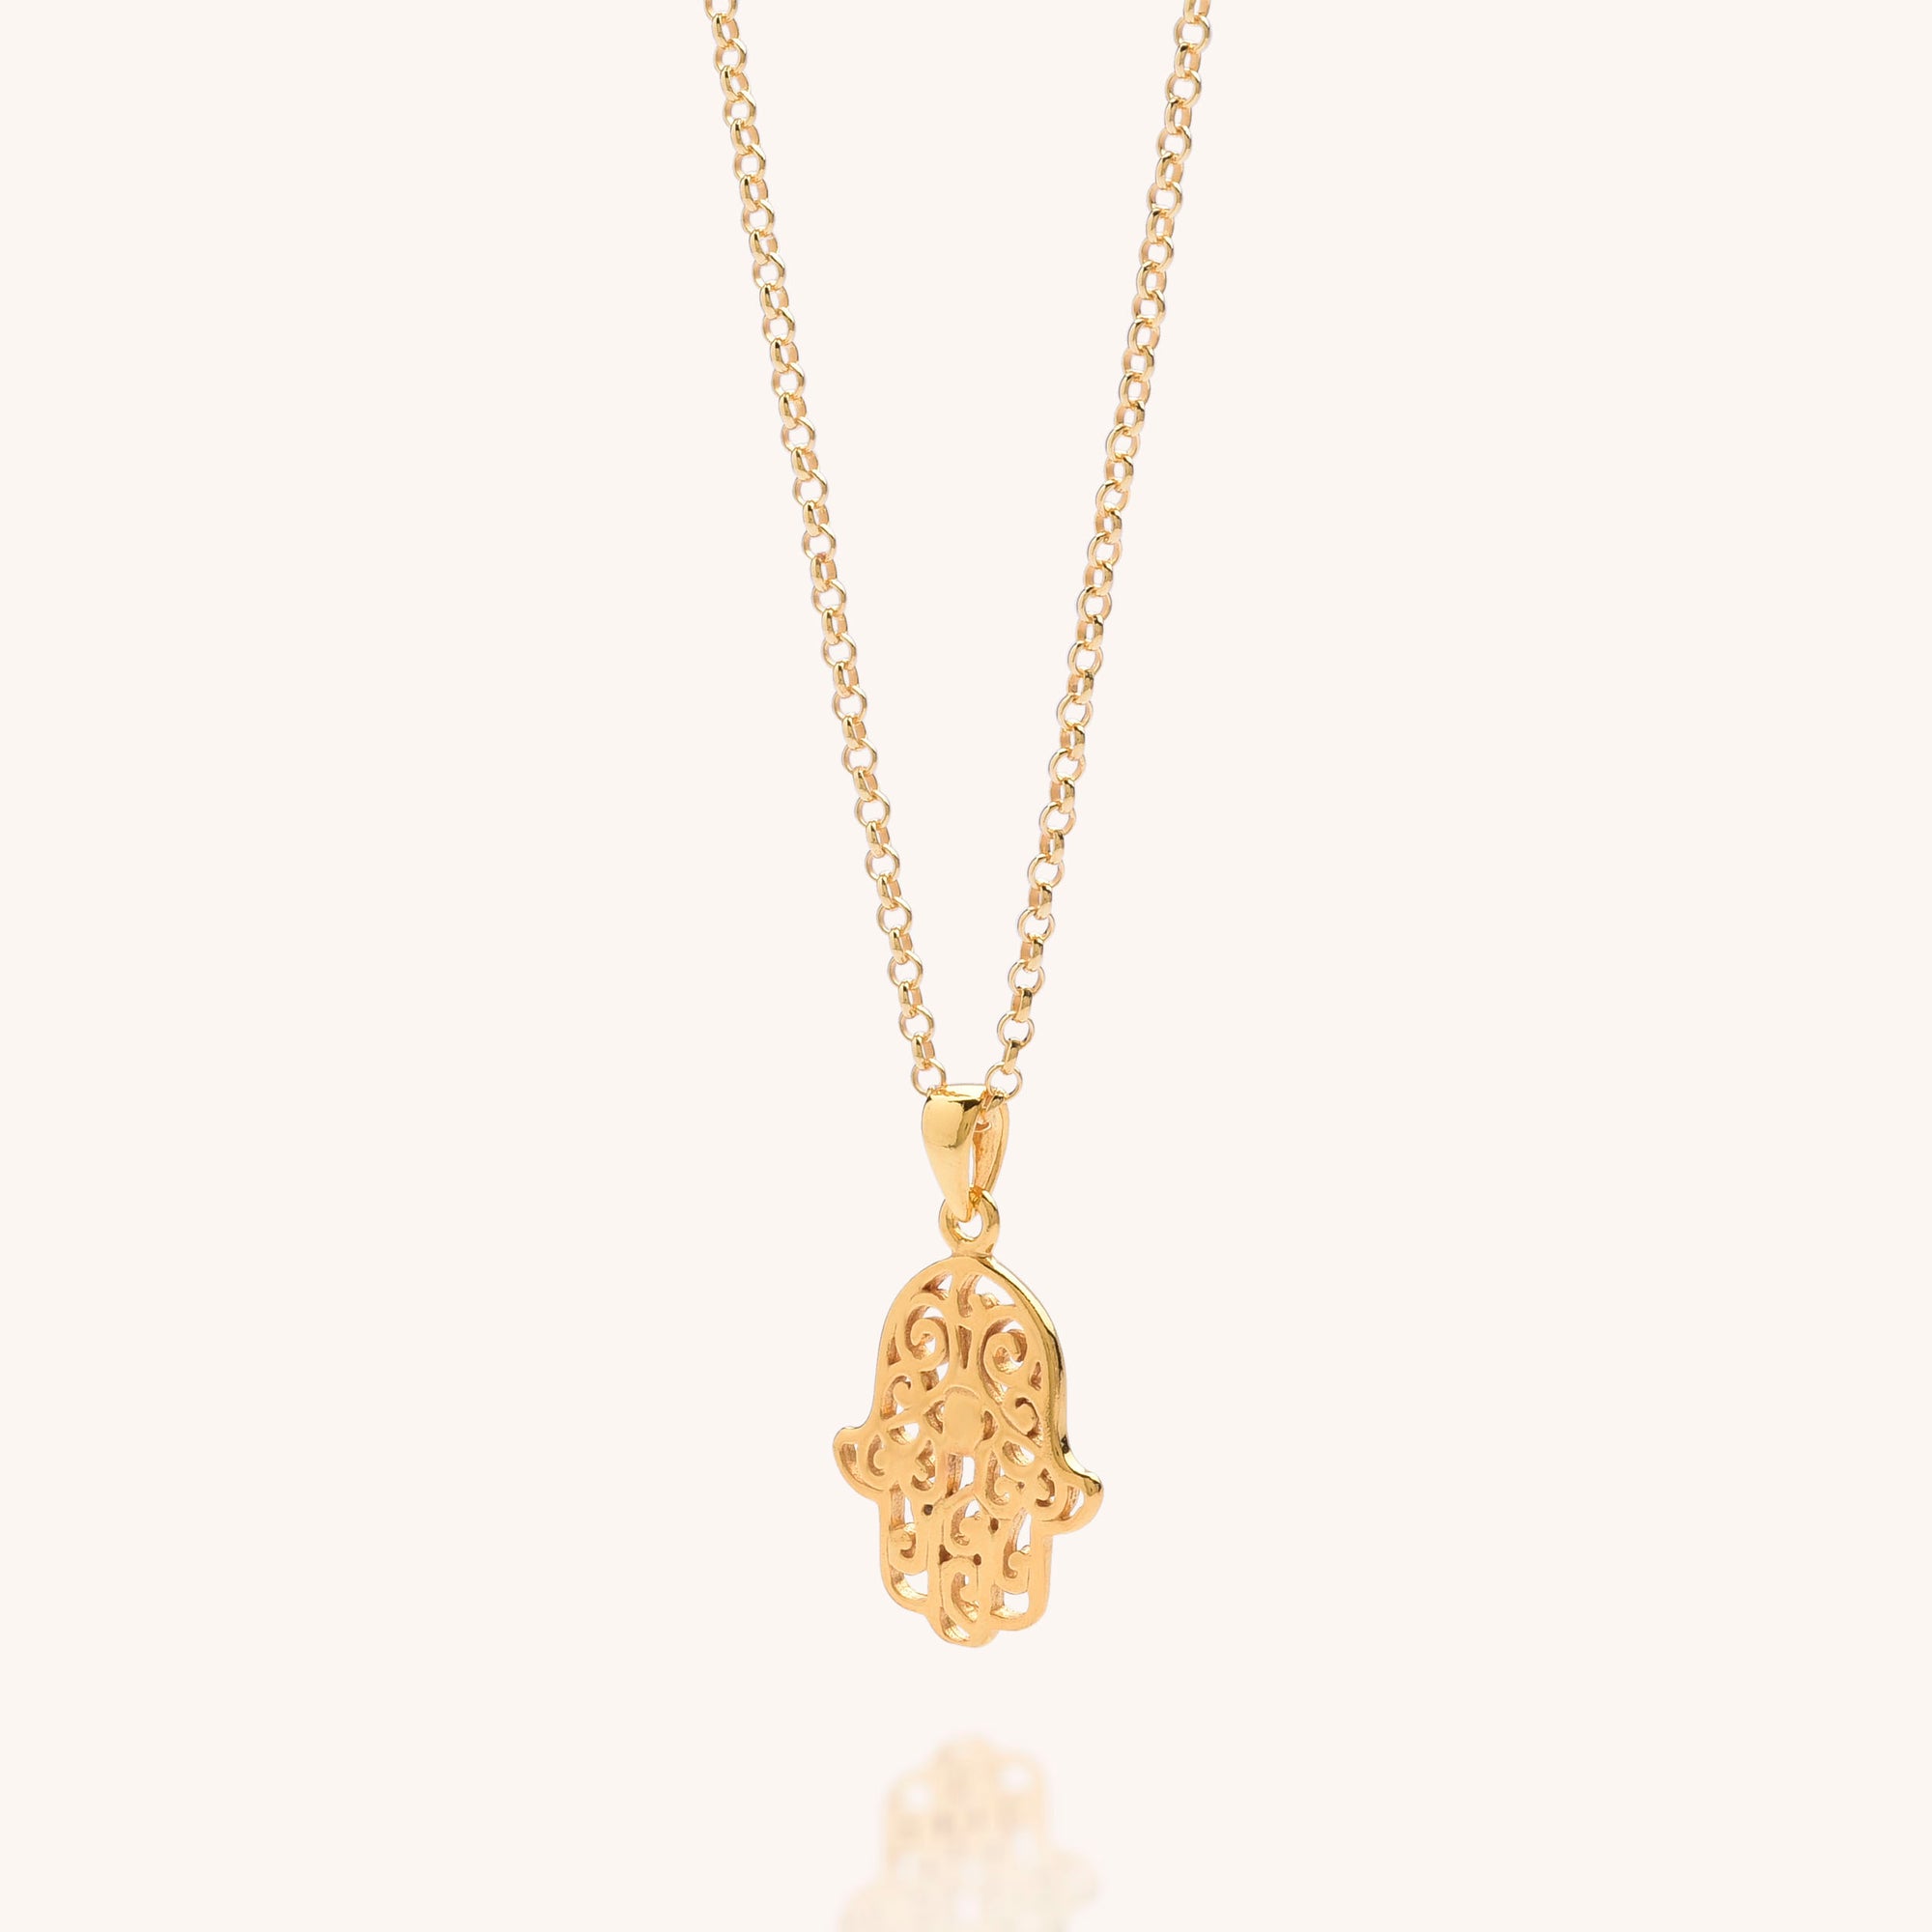 Nellou gold plated sterling silver hamsa hand necklace, hand of fatima necklace on eco silver chain perfect for layering, layered necklace